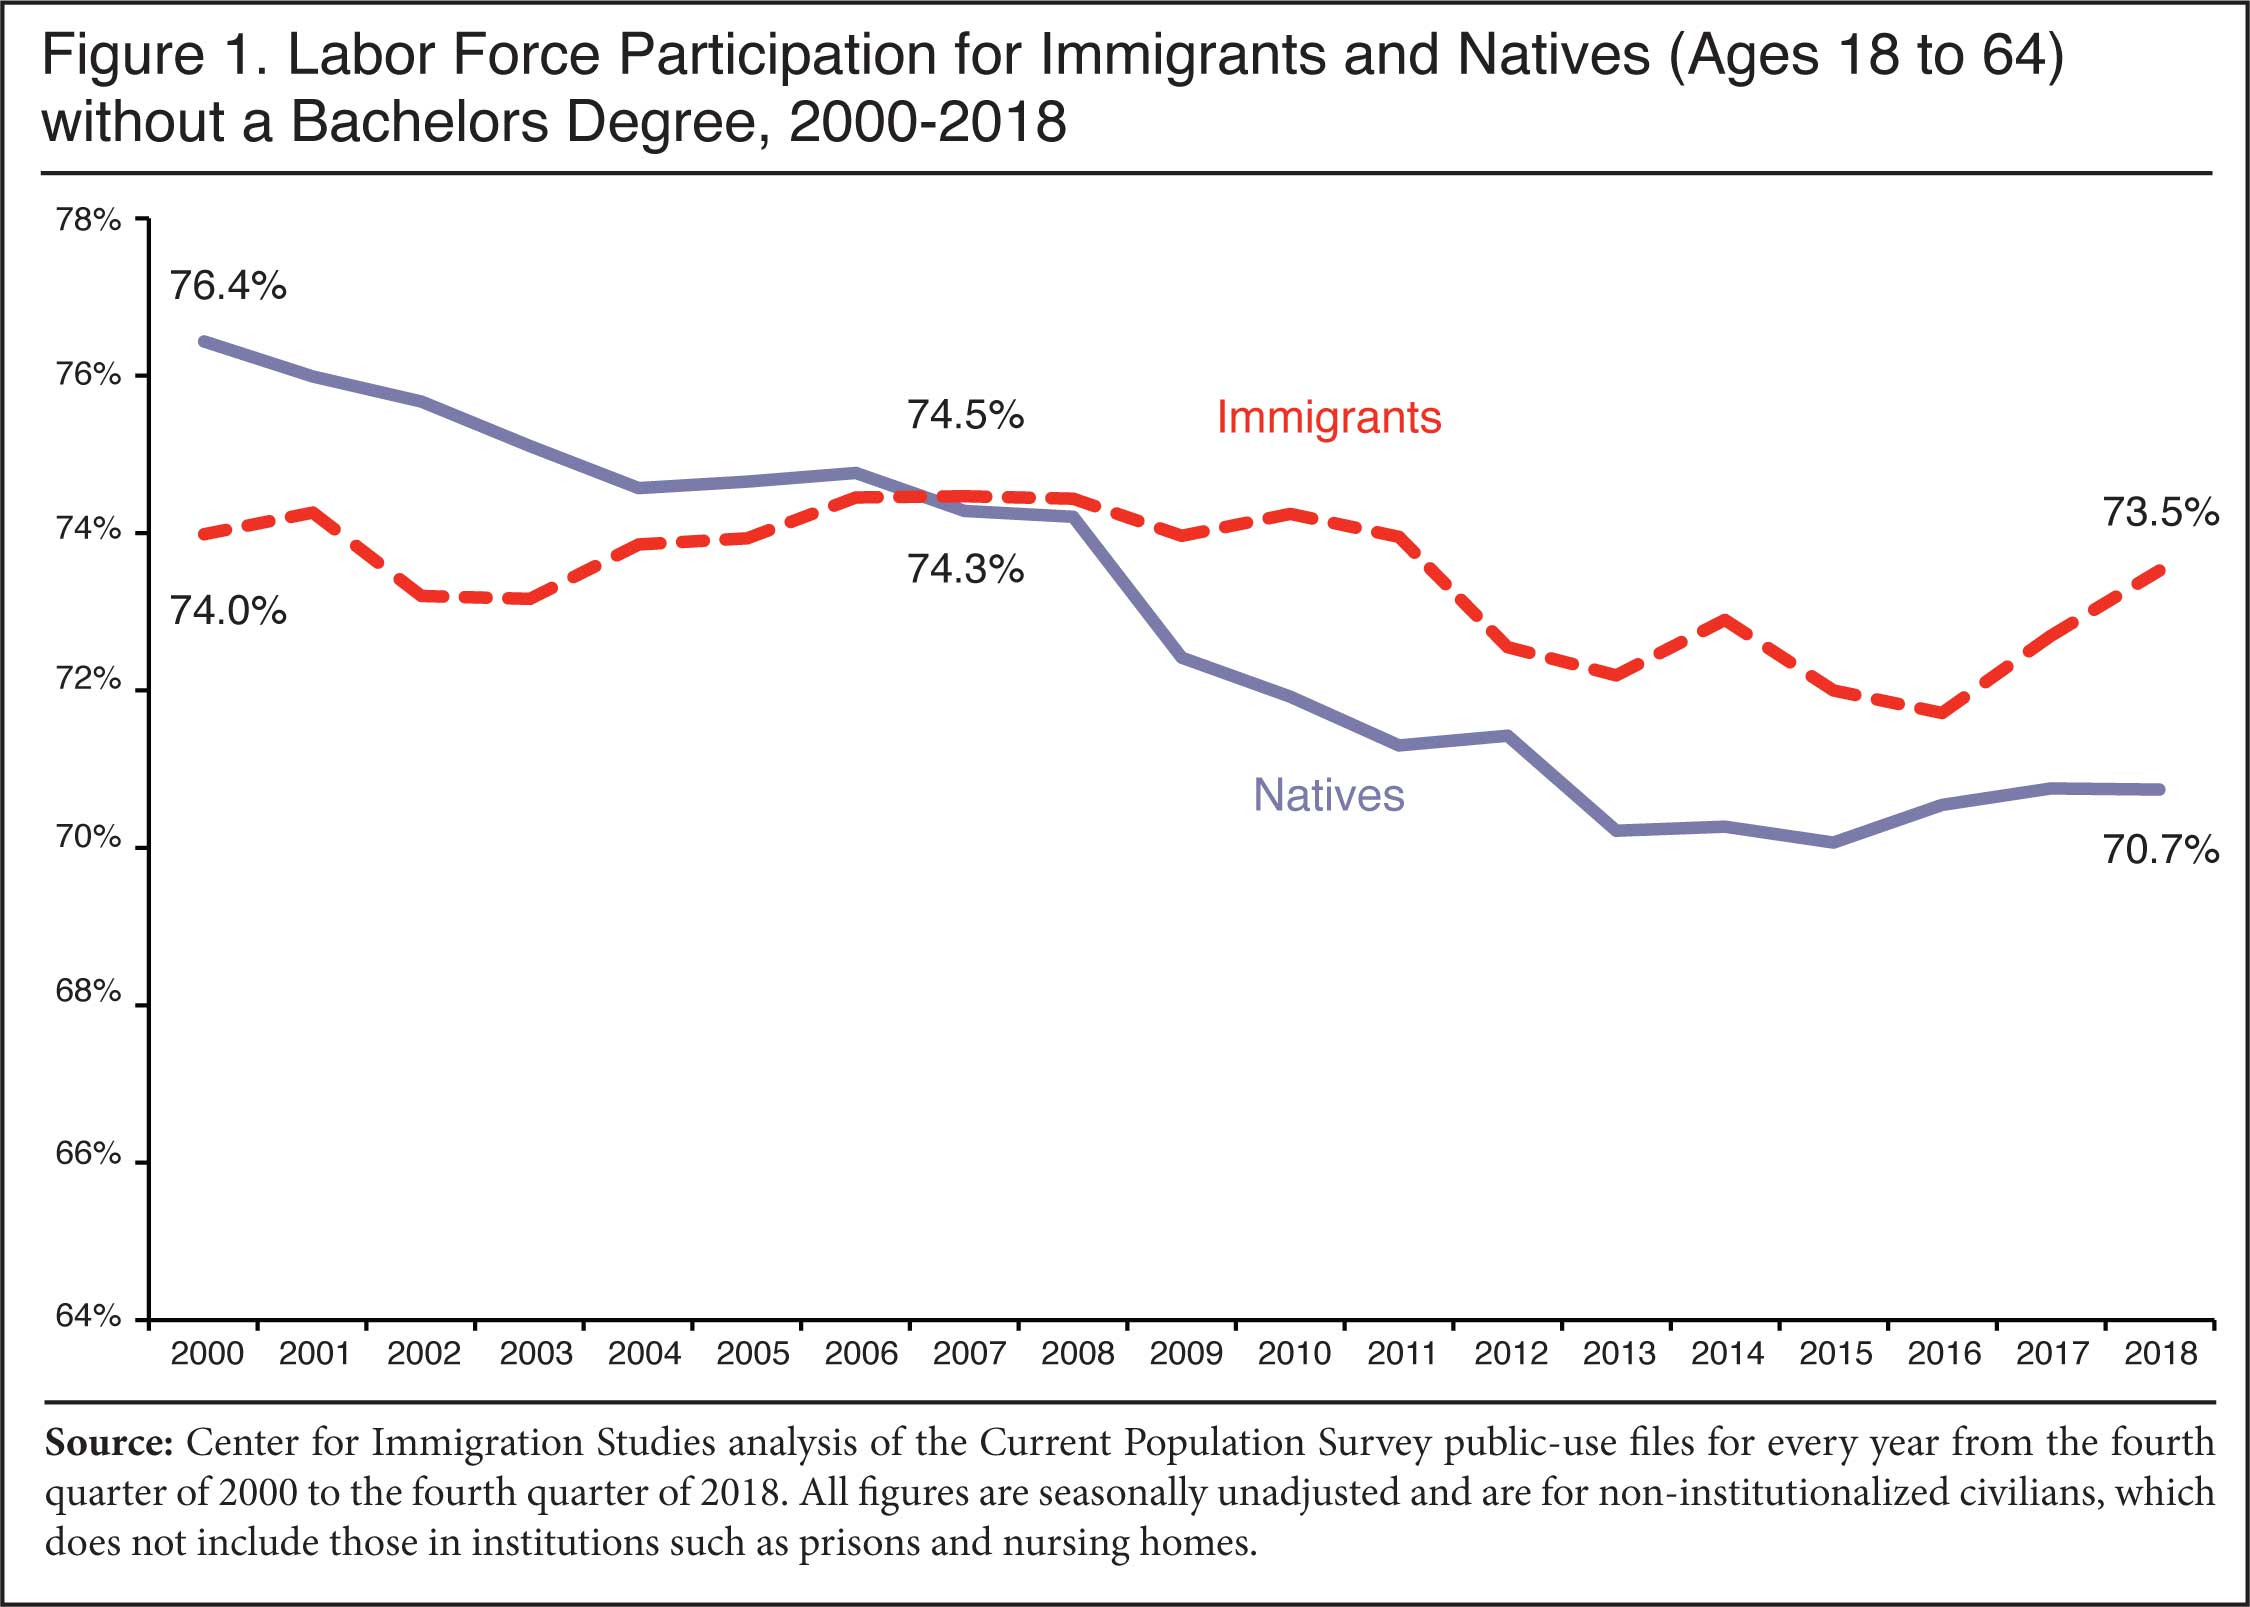 Labor Force Participation for Immigrants and Natives without a Bachelors Degree, 2000-2018